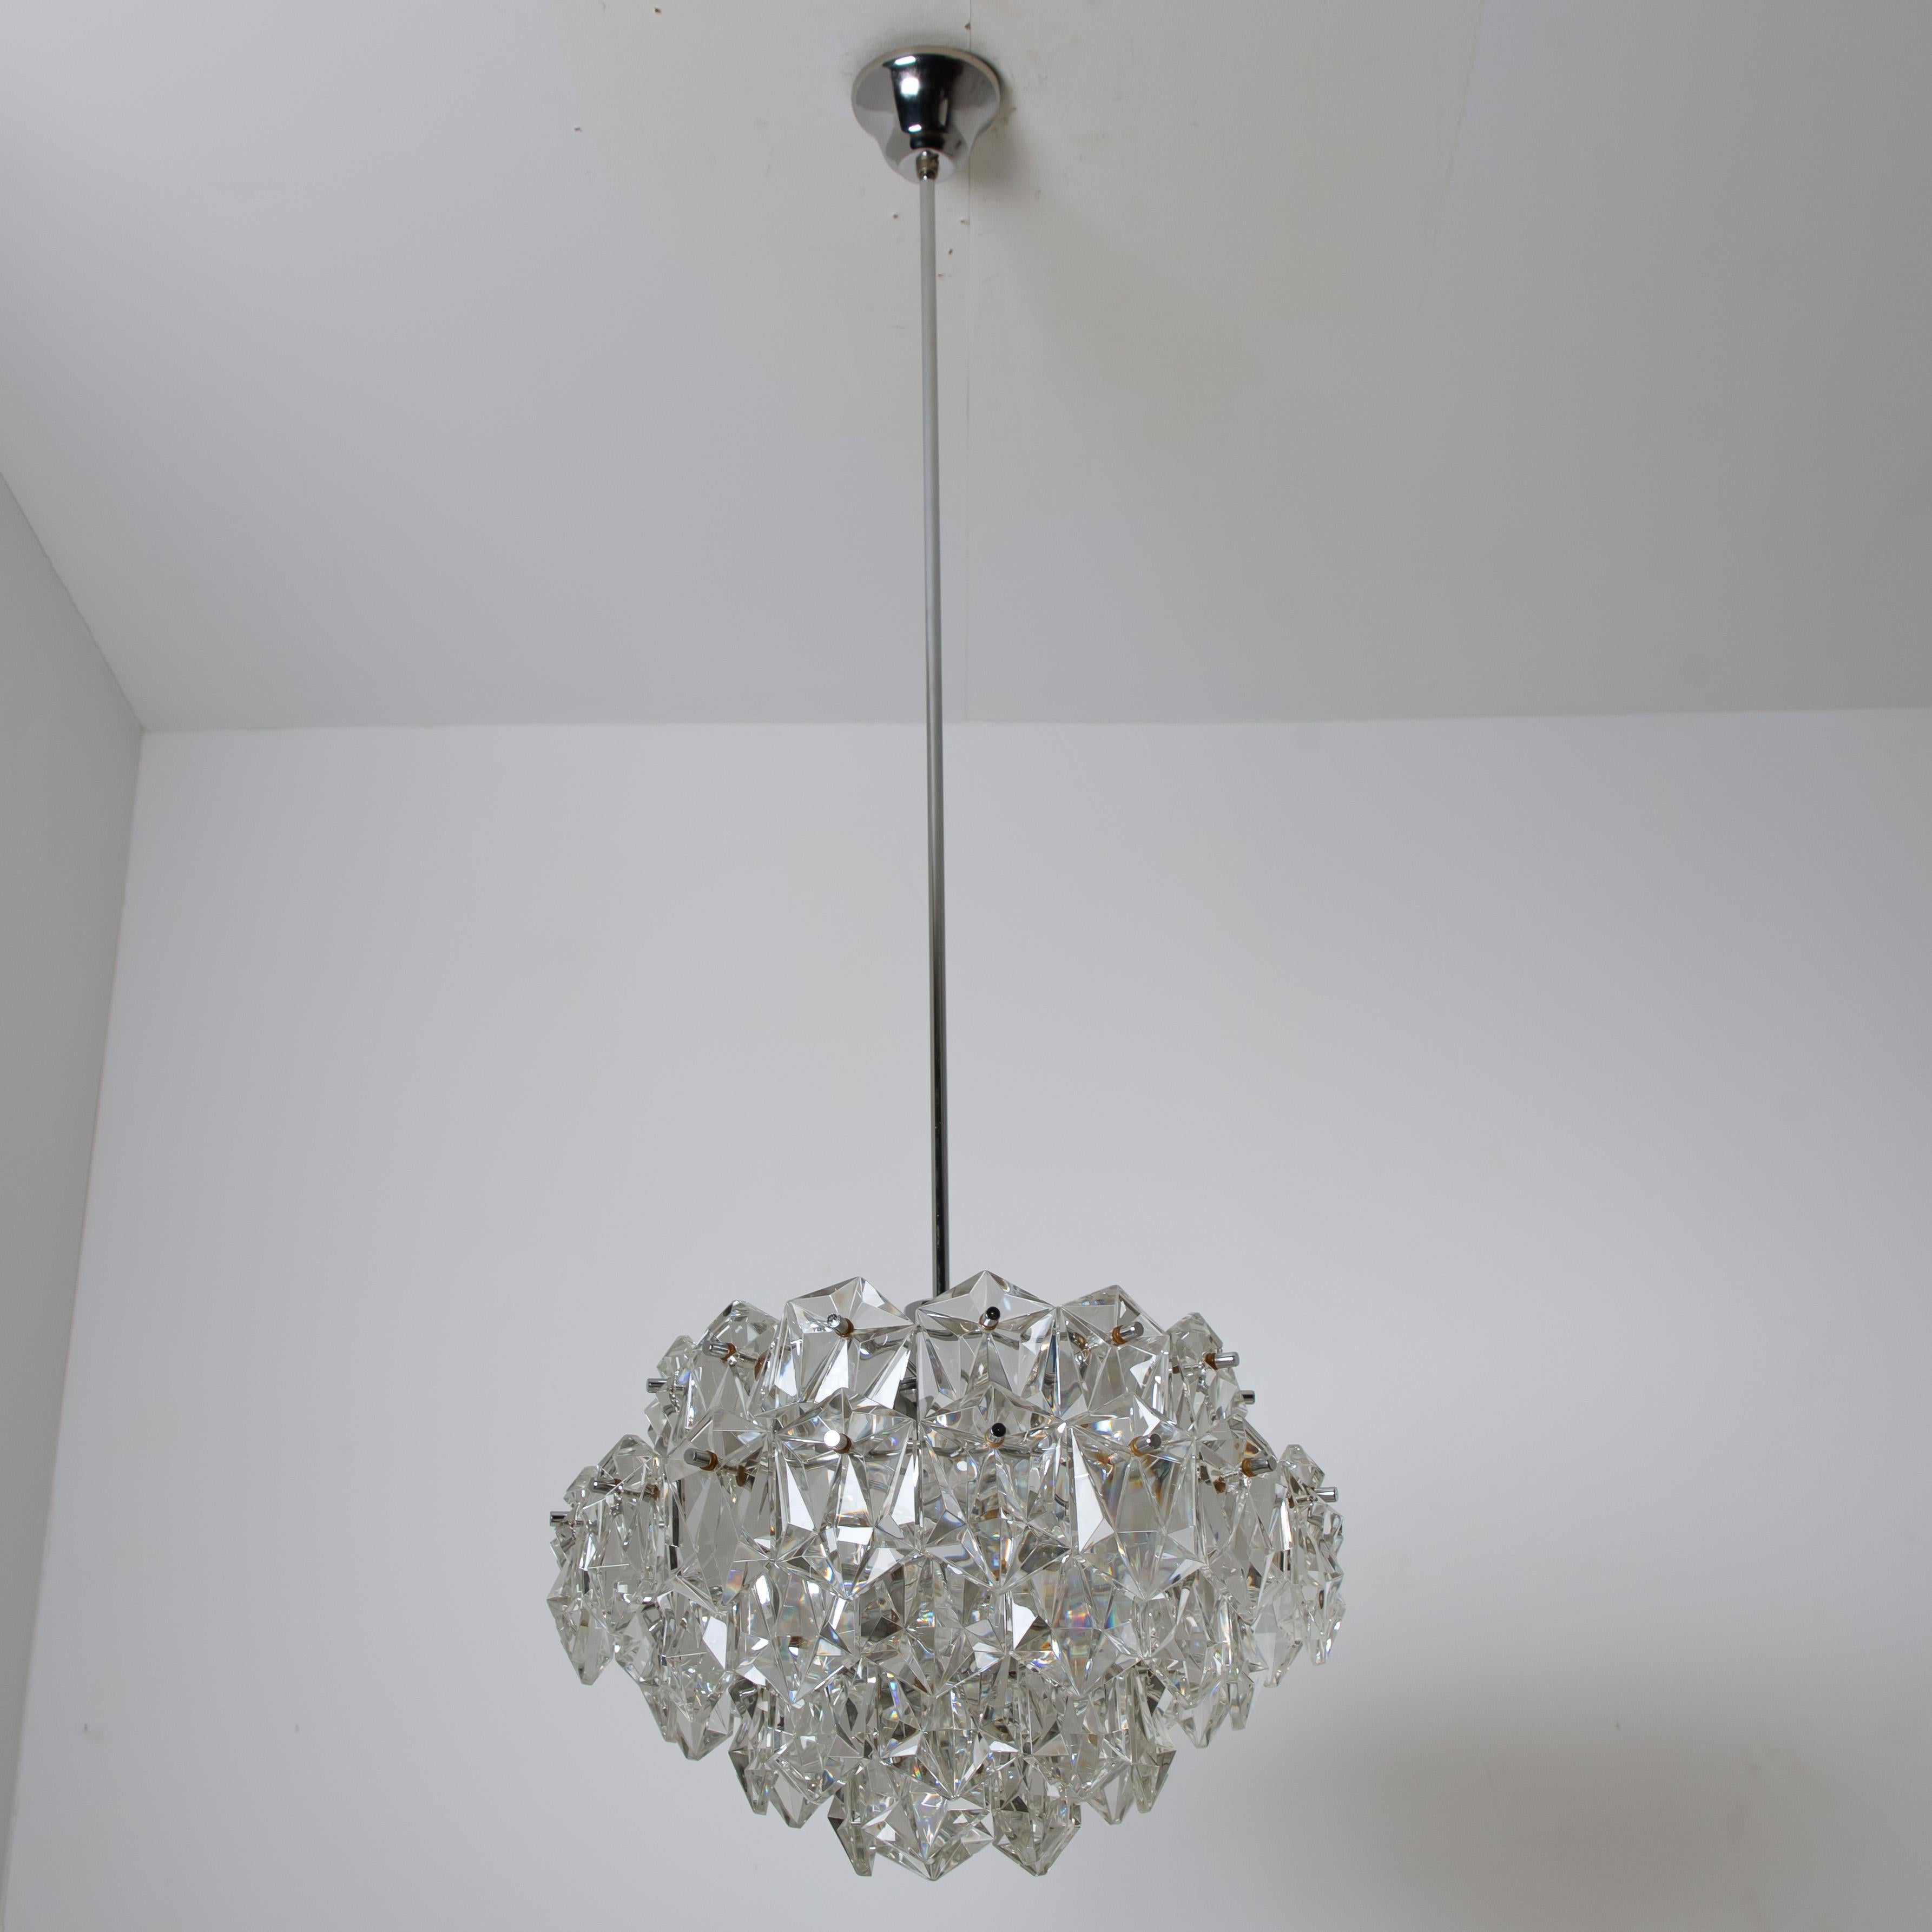 OTT Chrome and Crystal Chandelier, 1970s For Sale 4